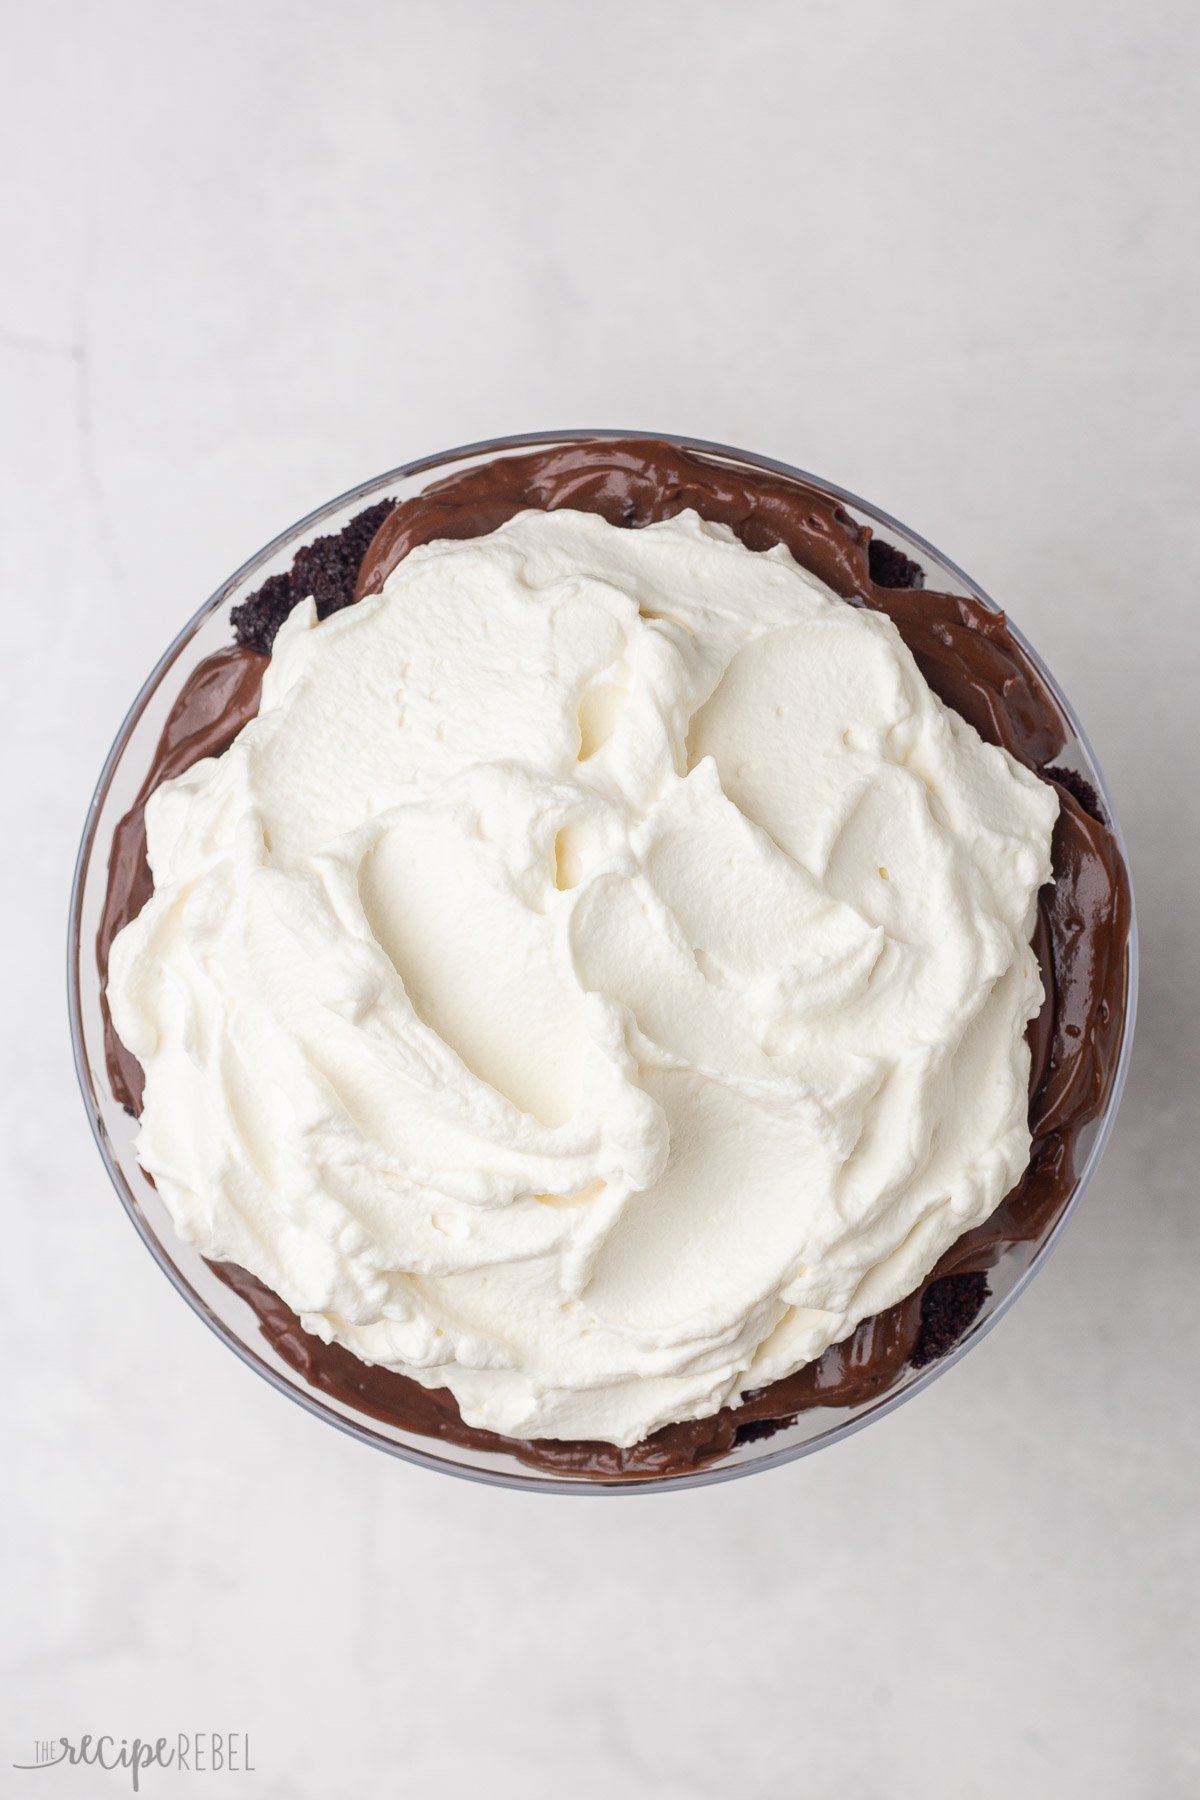 spread whipped cream on top of chocolate trifle.